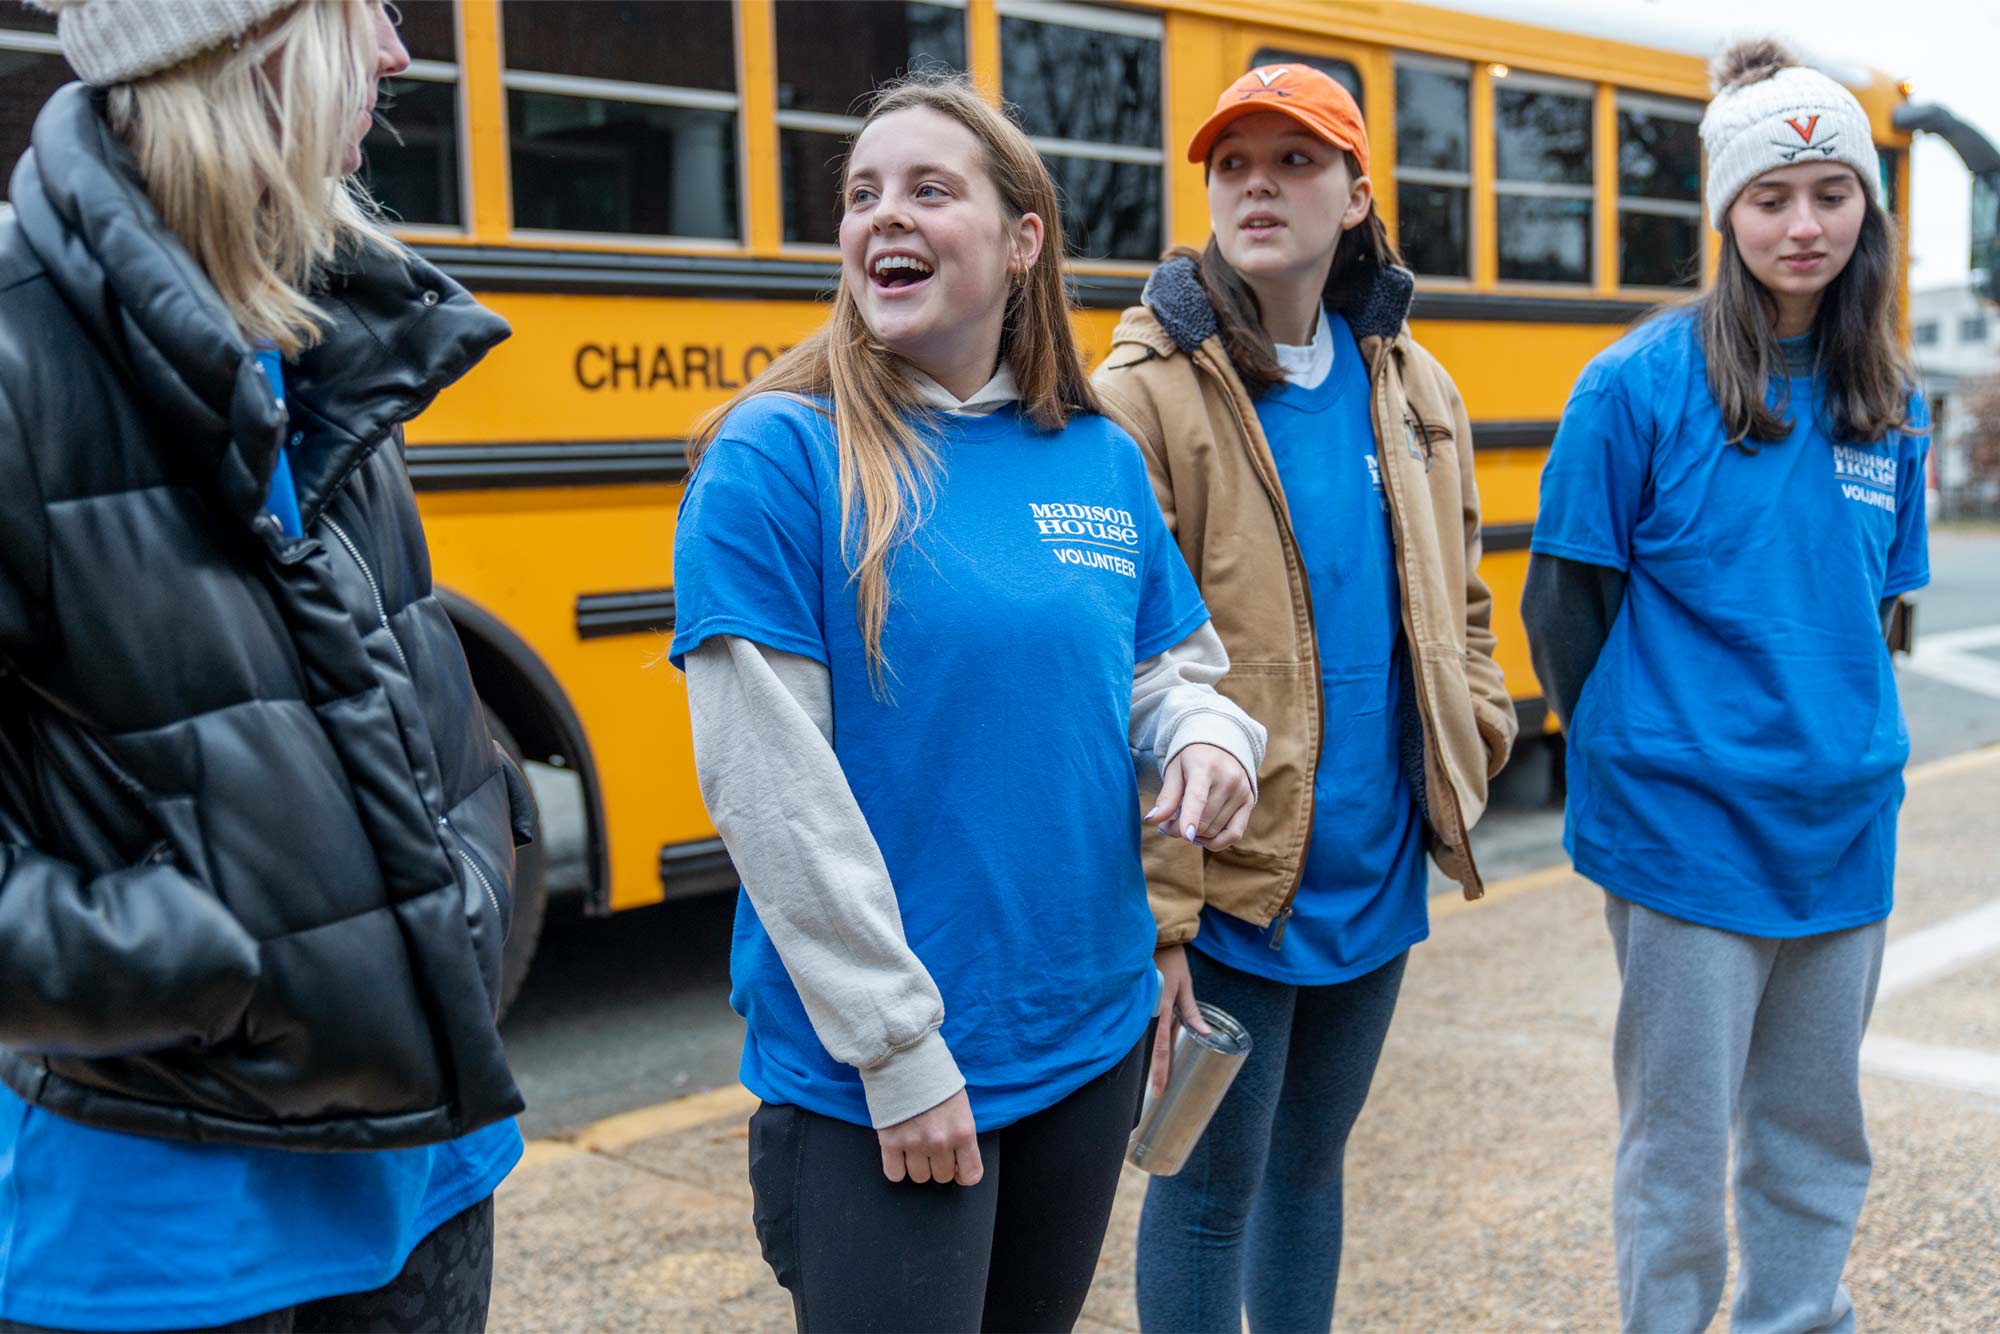 UVA students from left to right, Brianna Devine, Rachel Moore, Ellie Stombres and Kelly Shirer laughing in front of a bus